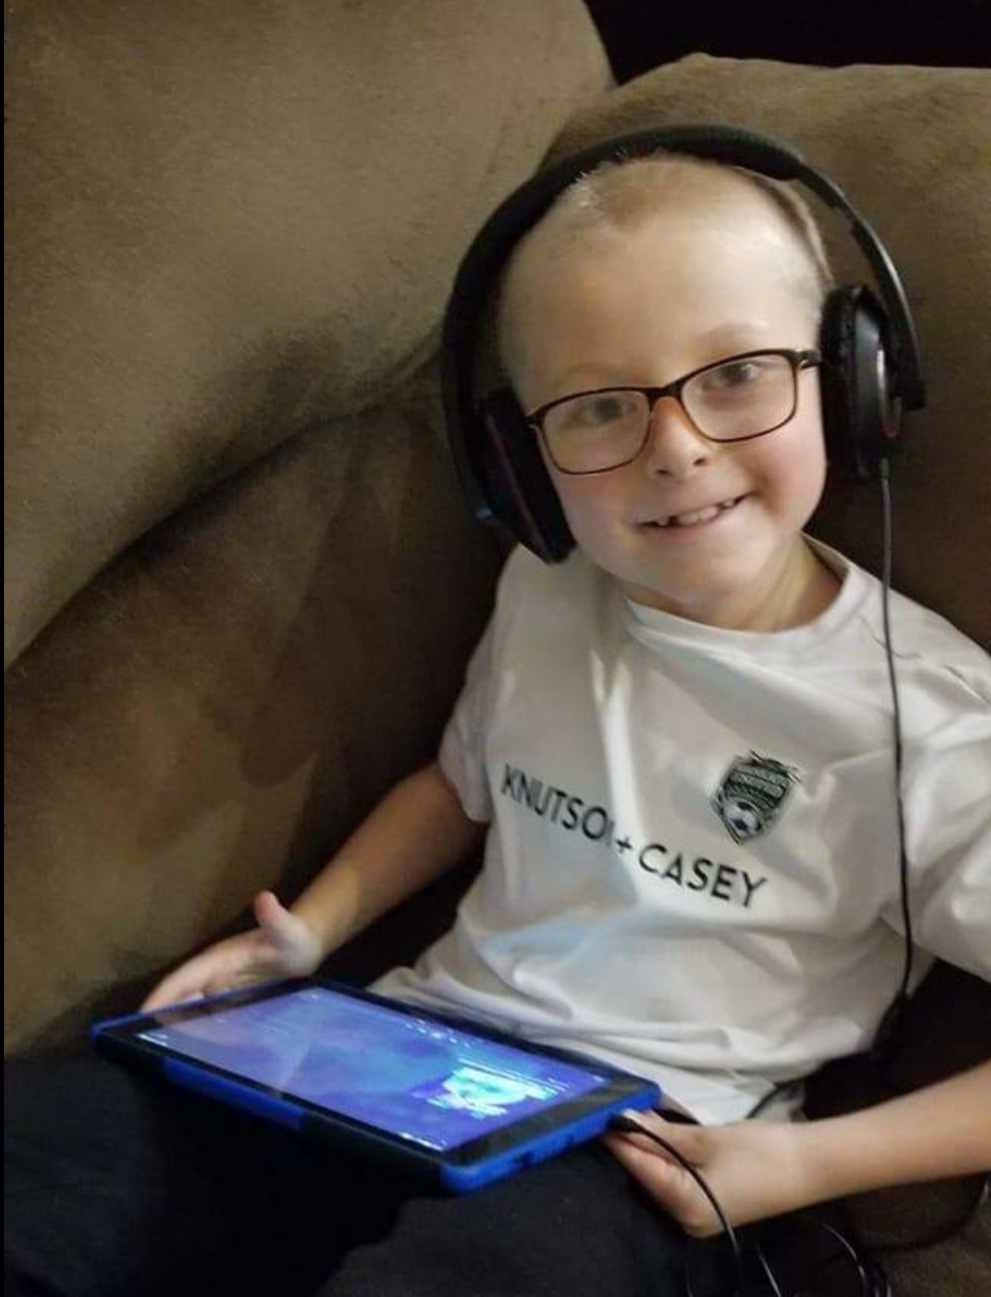 Wyatt smiles for the camera. He is wearing headphones and holding a games console.